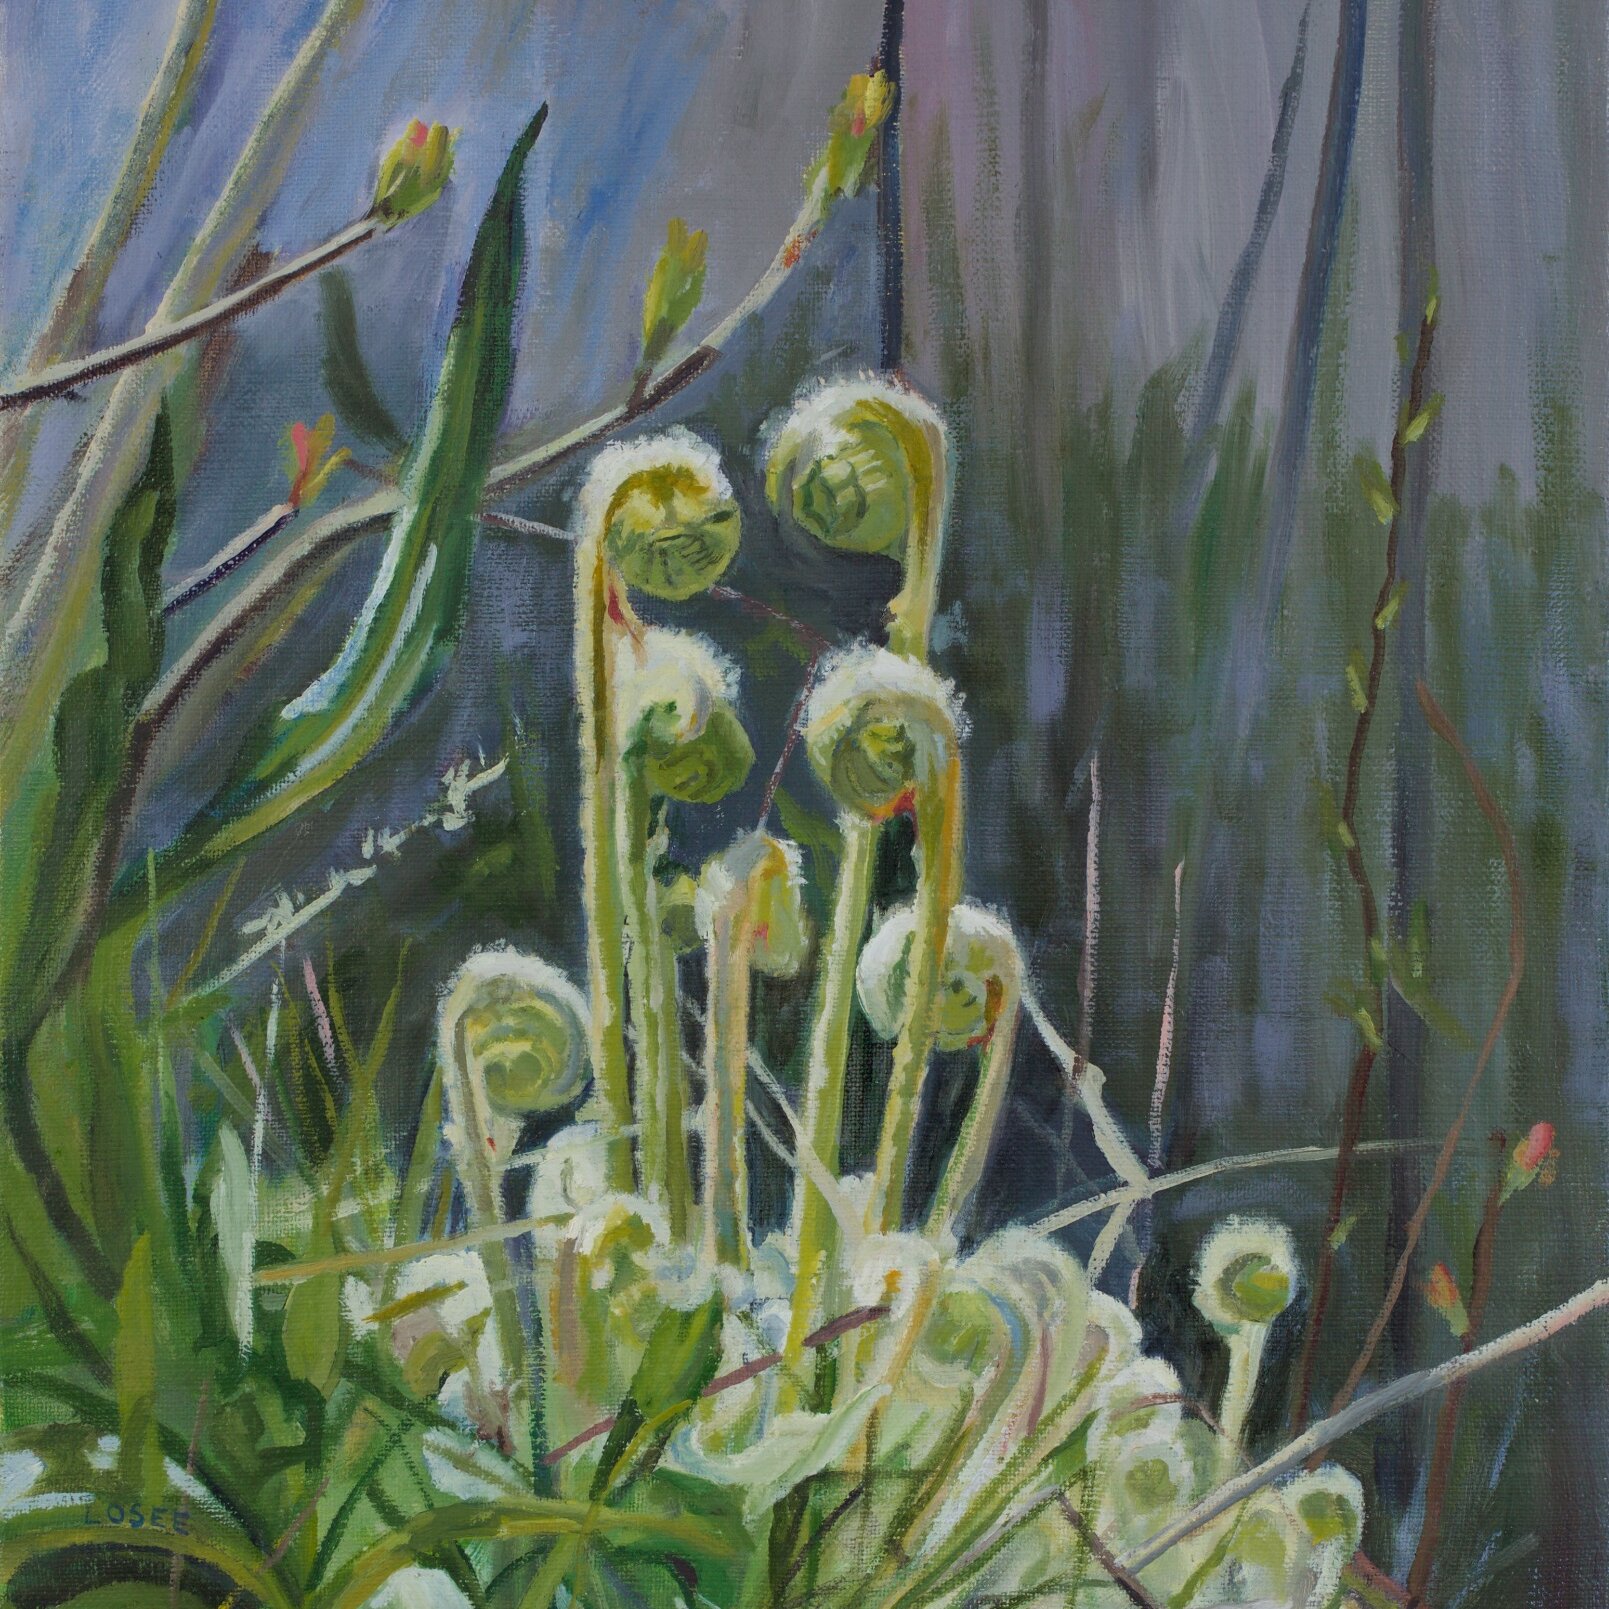 Oil painting of grass and flowers